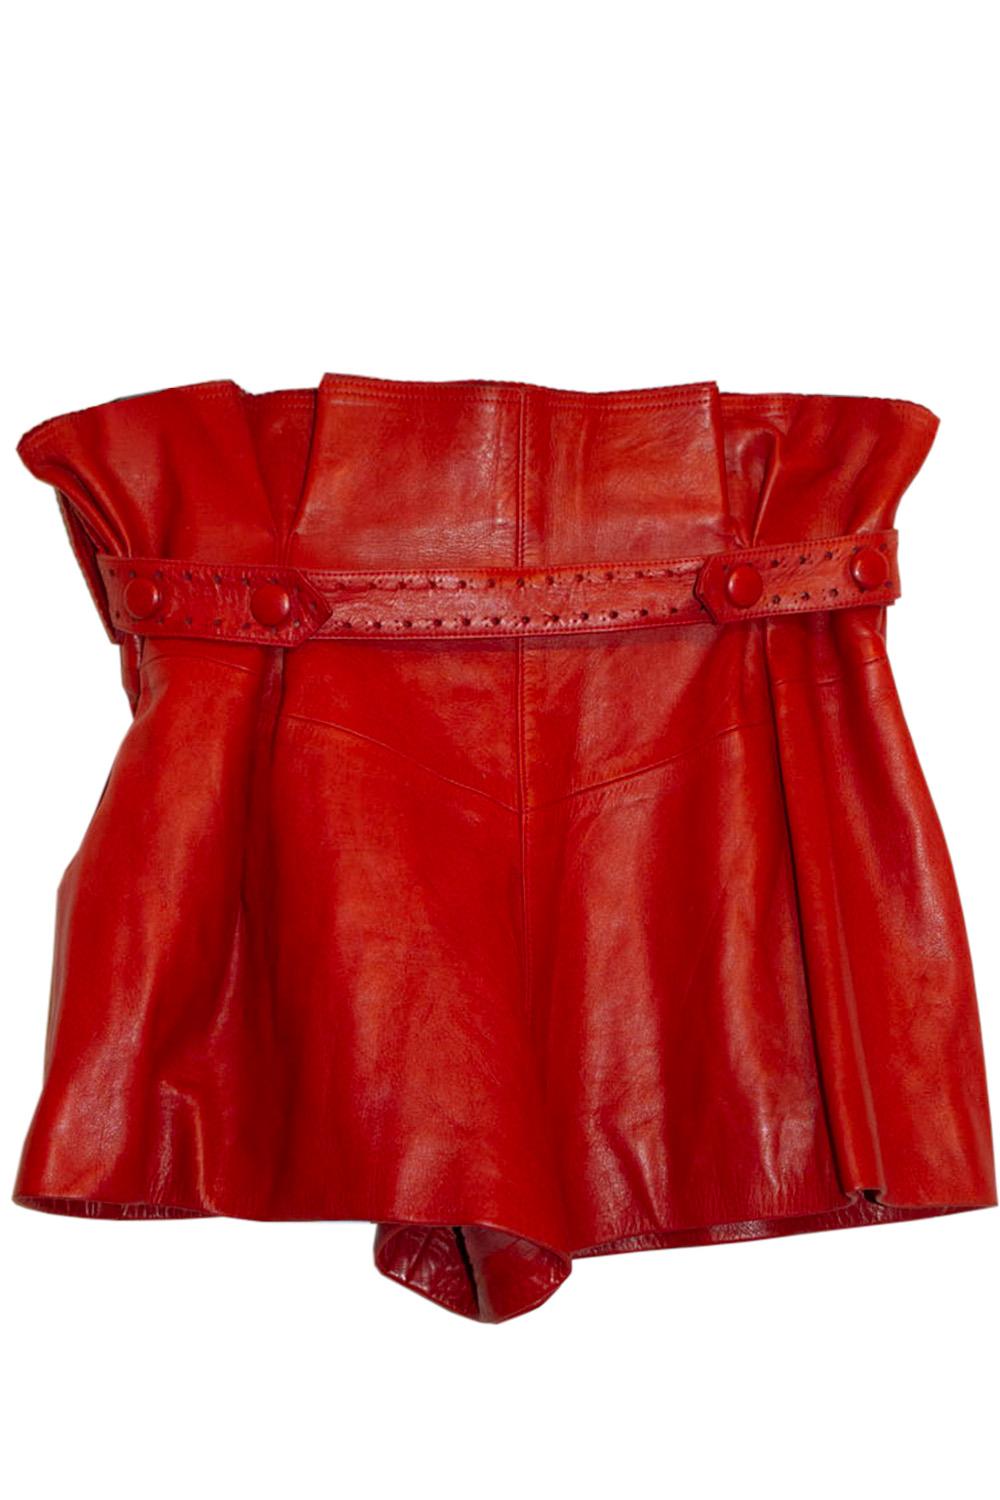 Vintage Chloe Red Leather Shorts For Sale 2